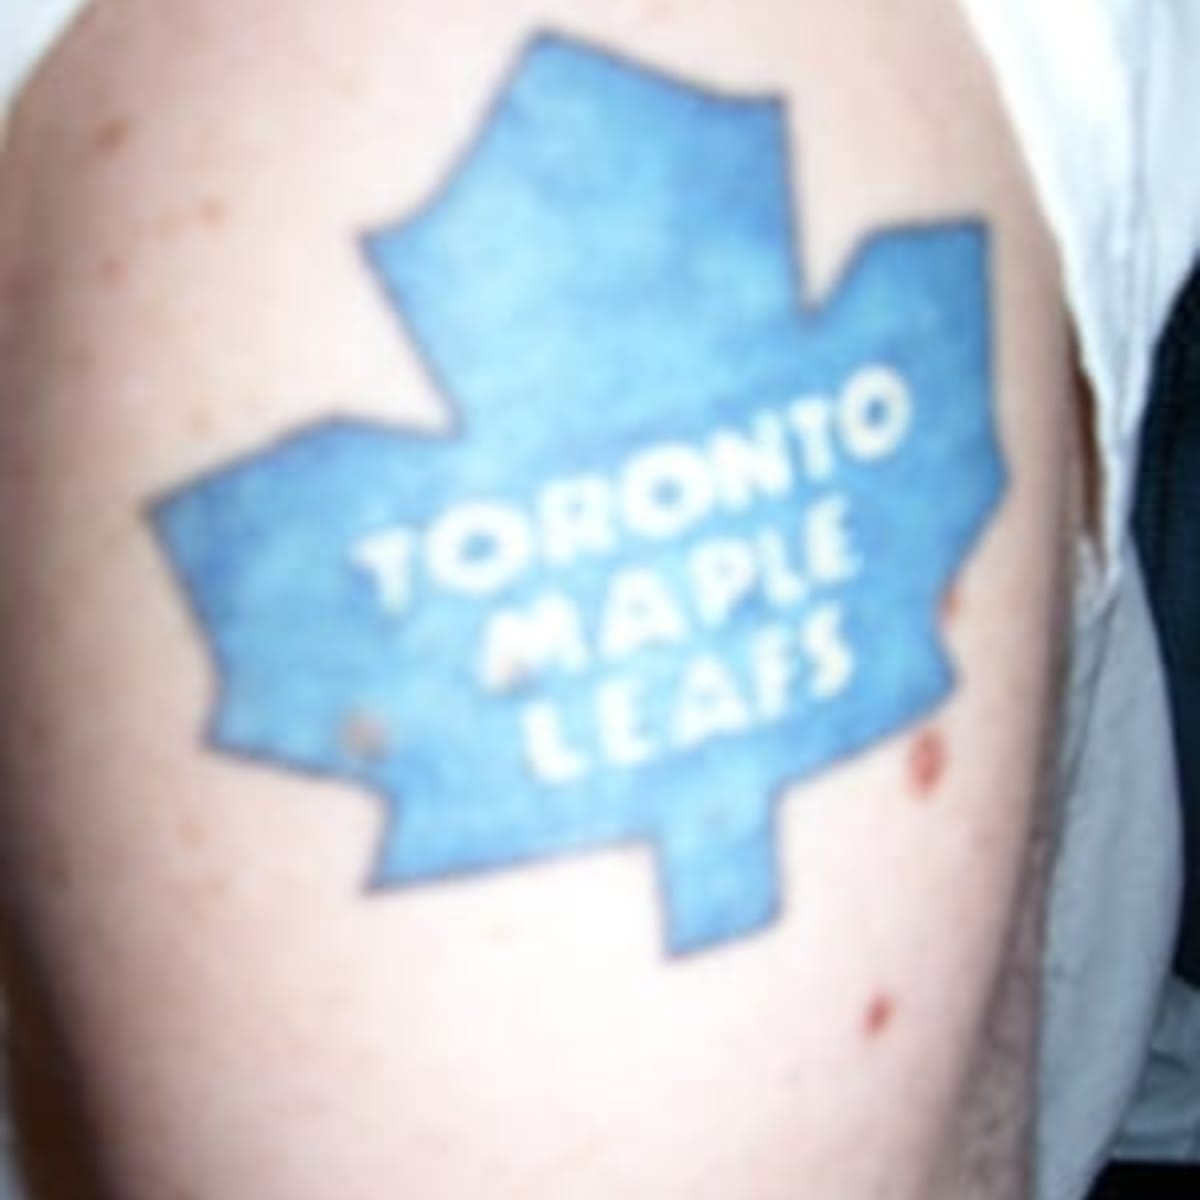 Toronto Maple Leafs Tattoos Are the Most Popular of Any Sports Team in the  World